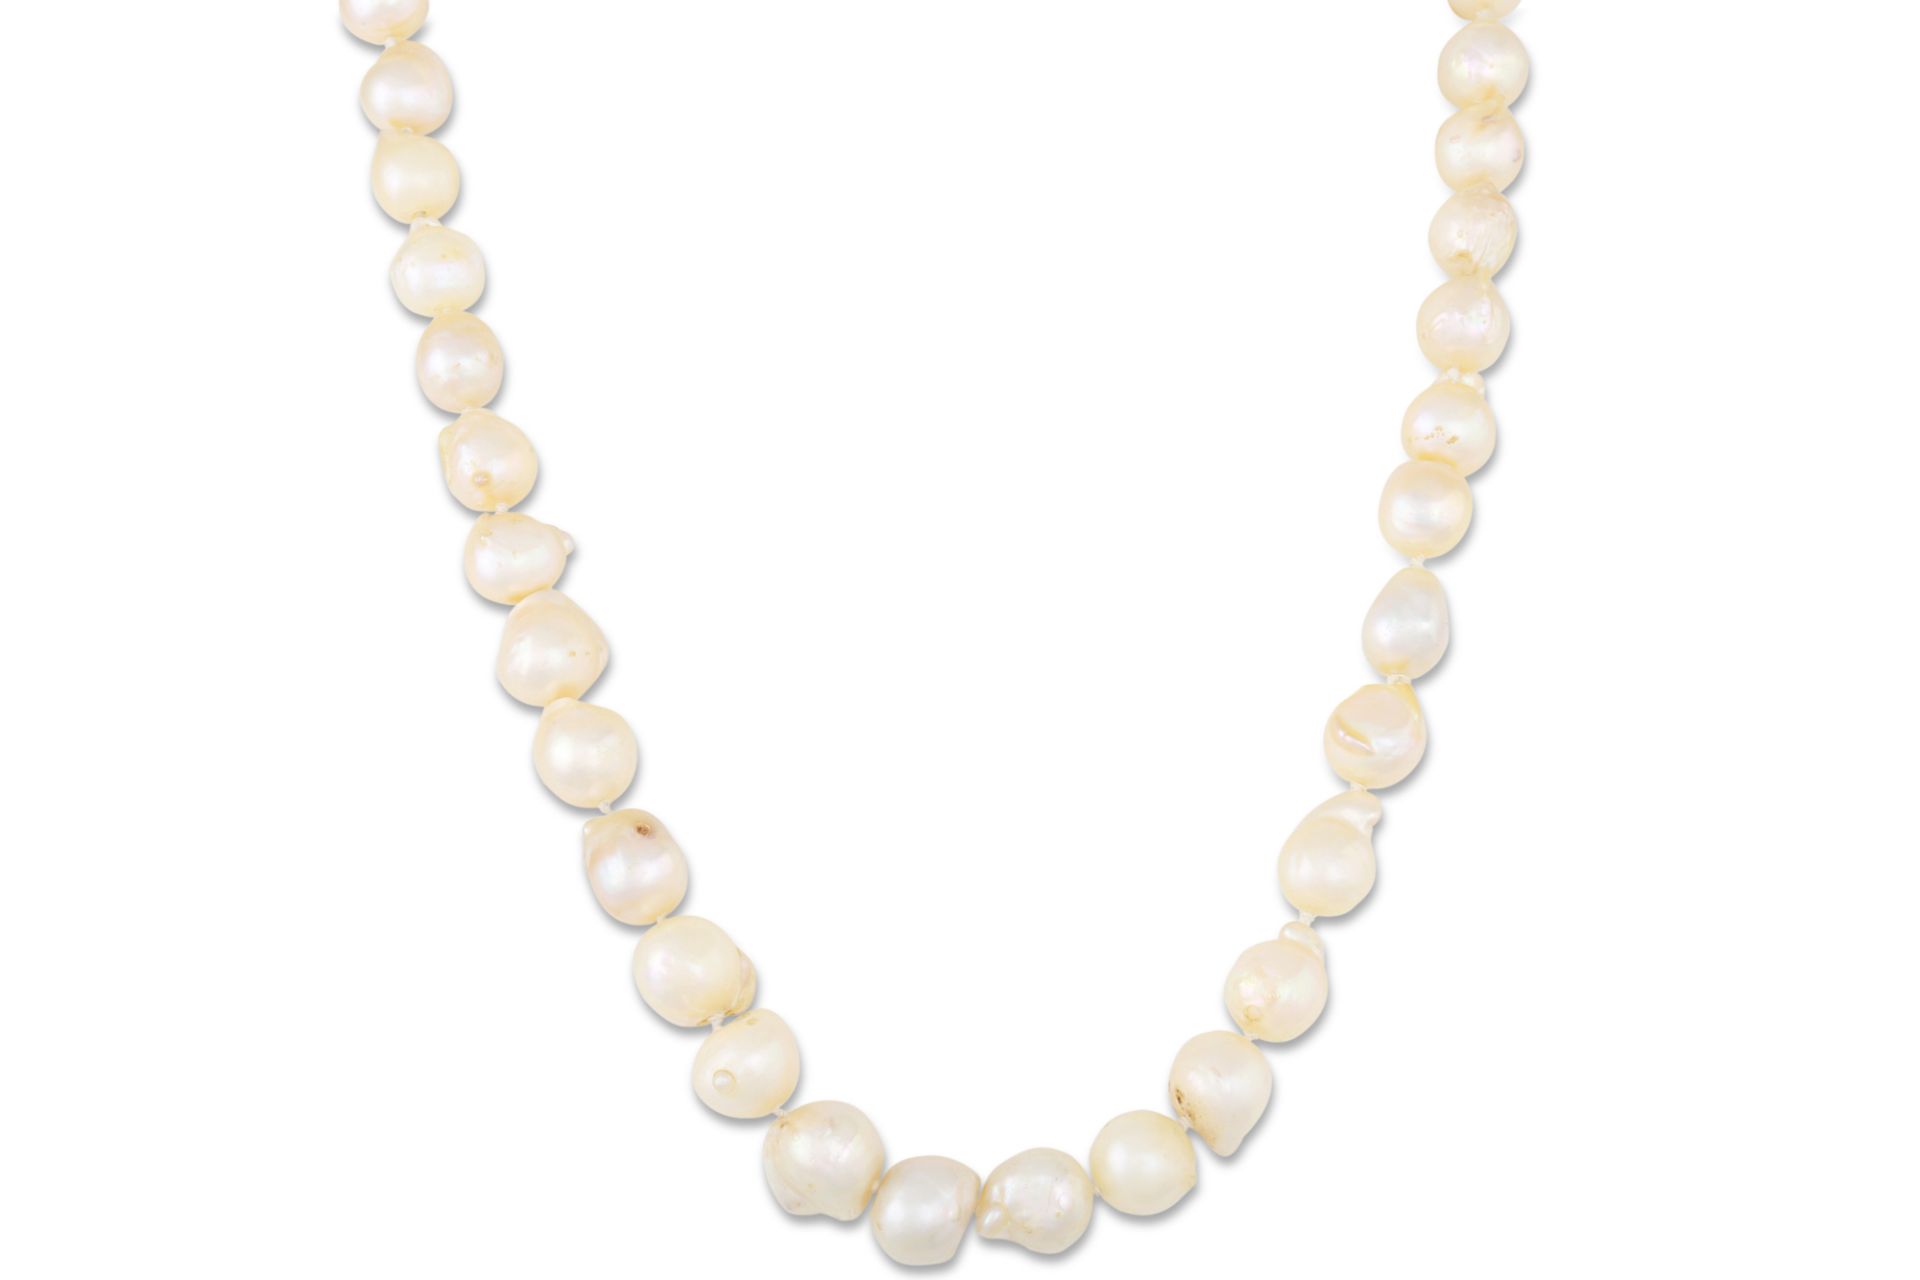 A BAROQUE PEARL NECKLACE, cream tones with a 9ct gold clasp